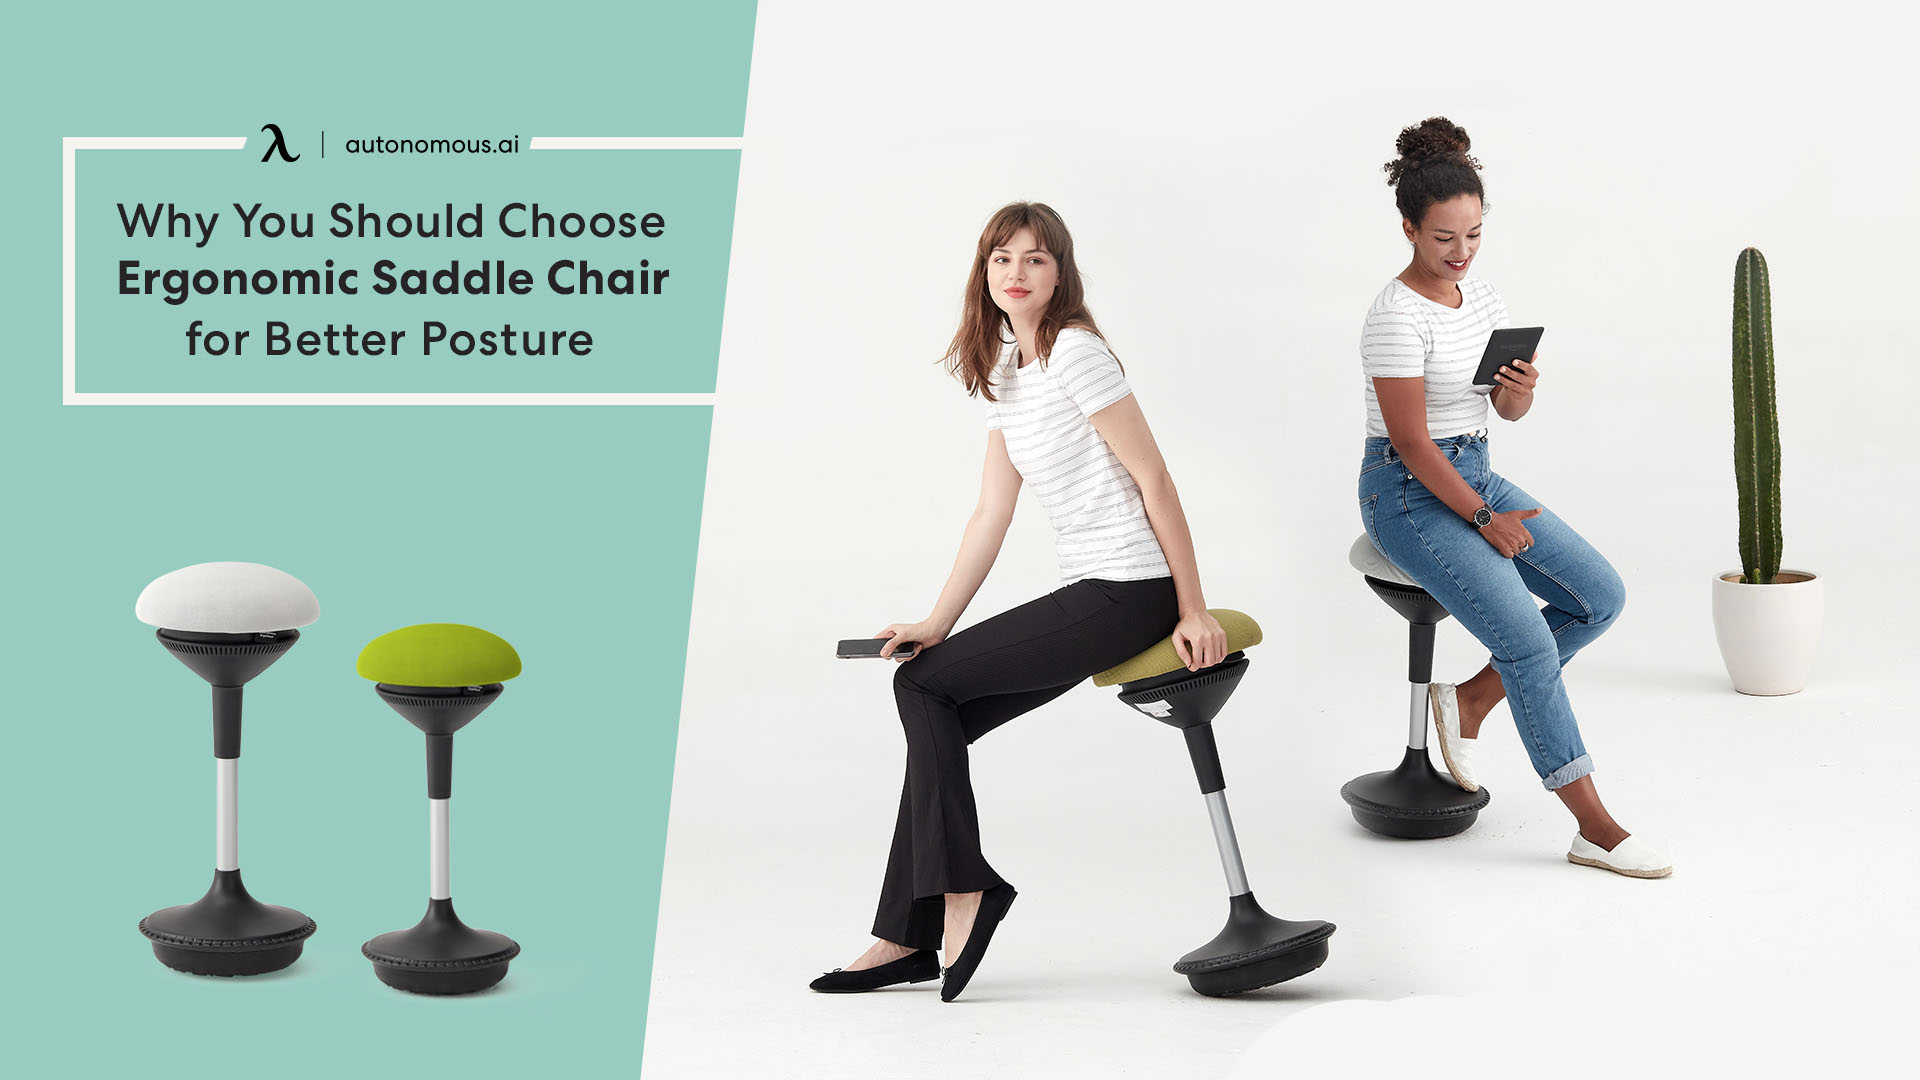 Why You Should Choose Ergonomic Saddle Chair for Better Posture